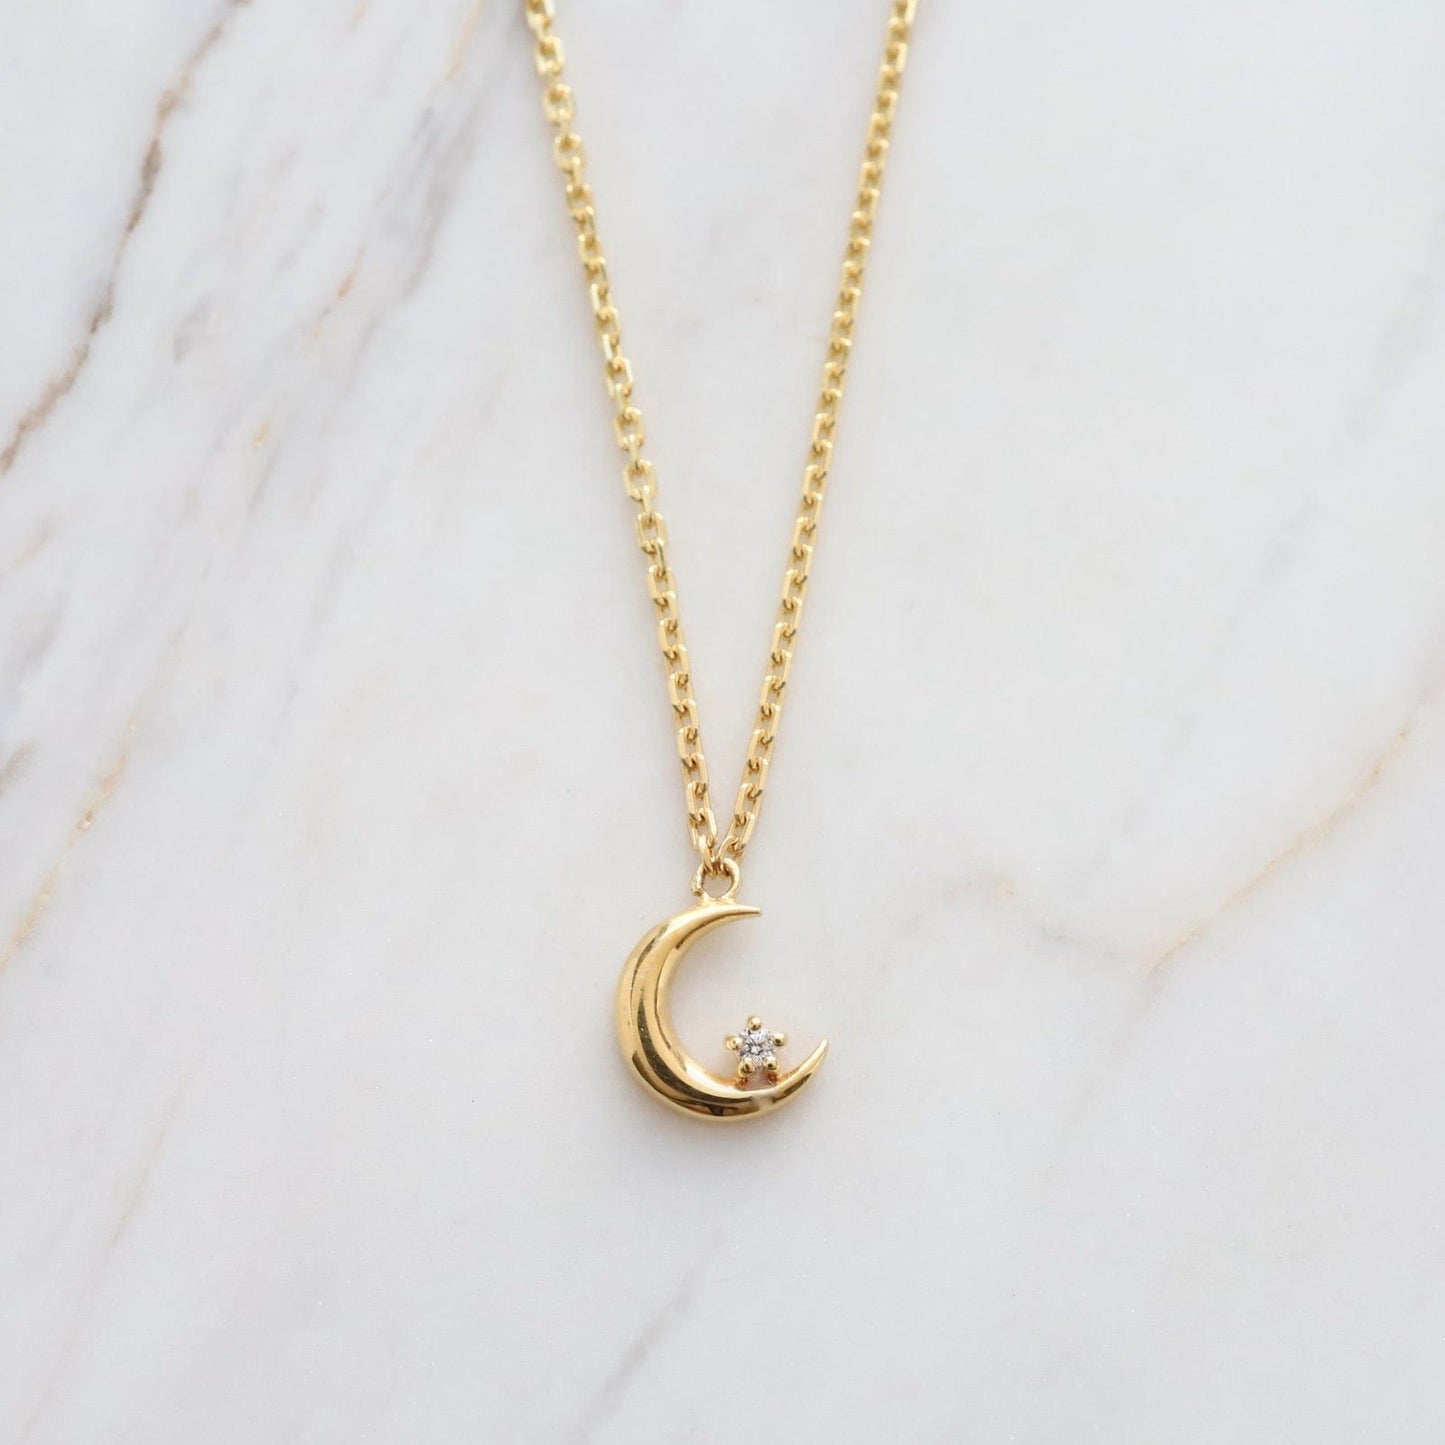 NKL-VRM Crescent Moon with Single CZ in Gold Vermeil